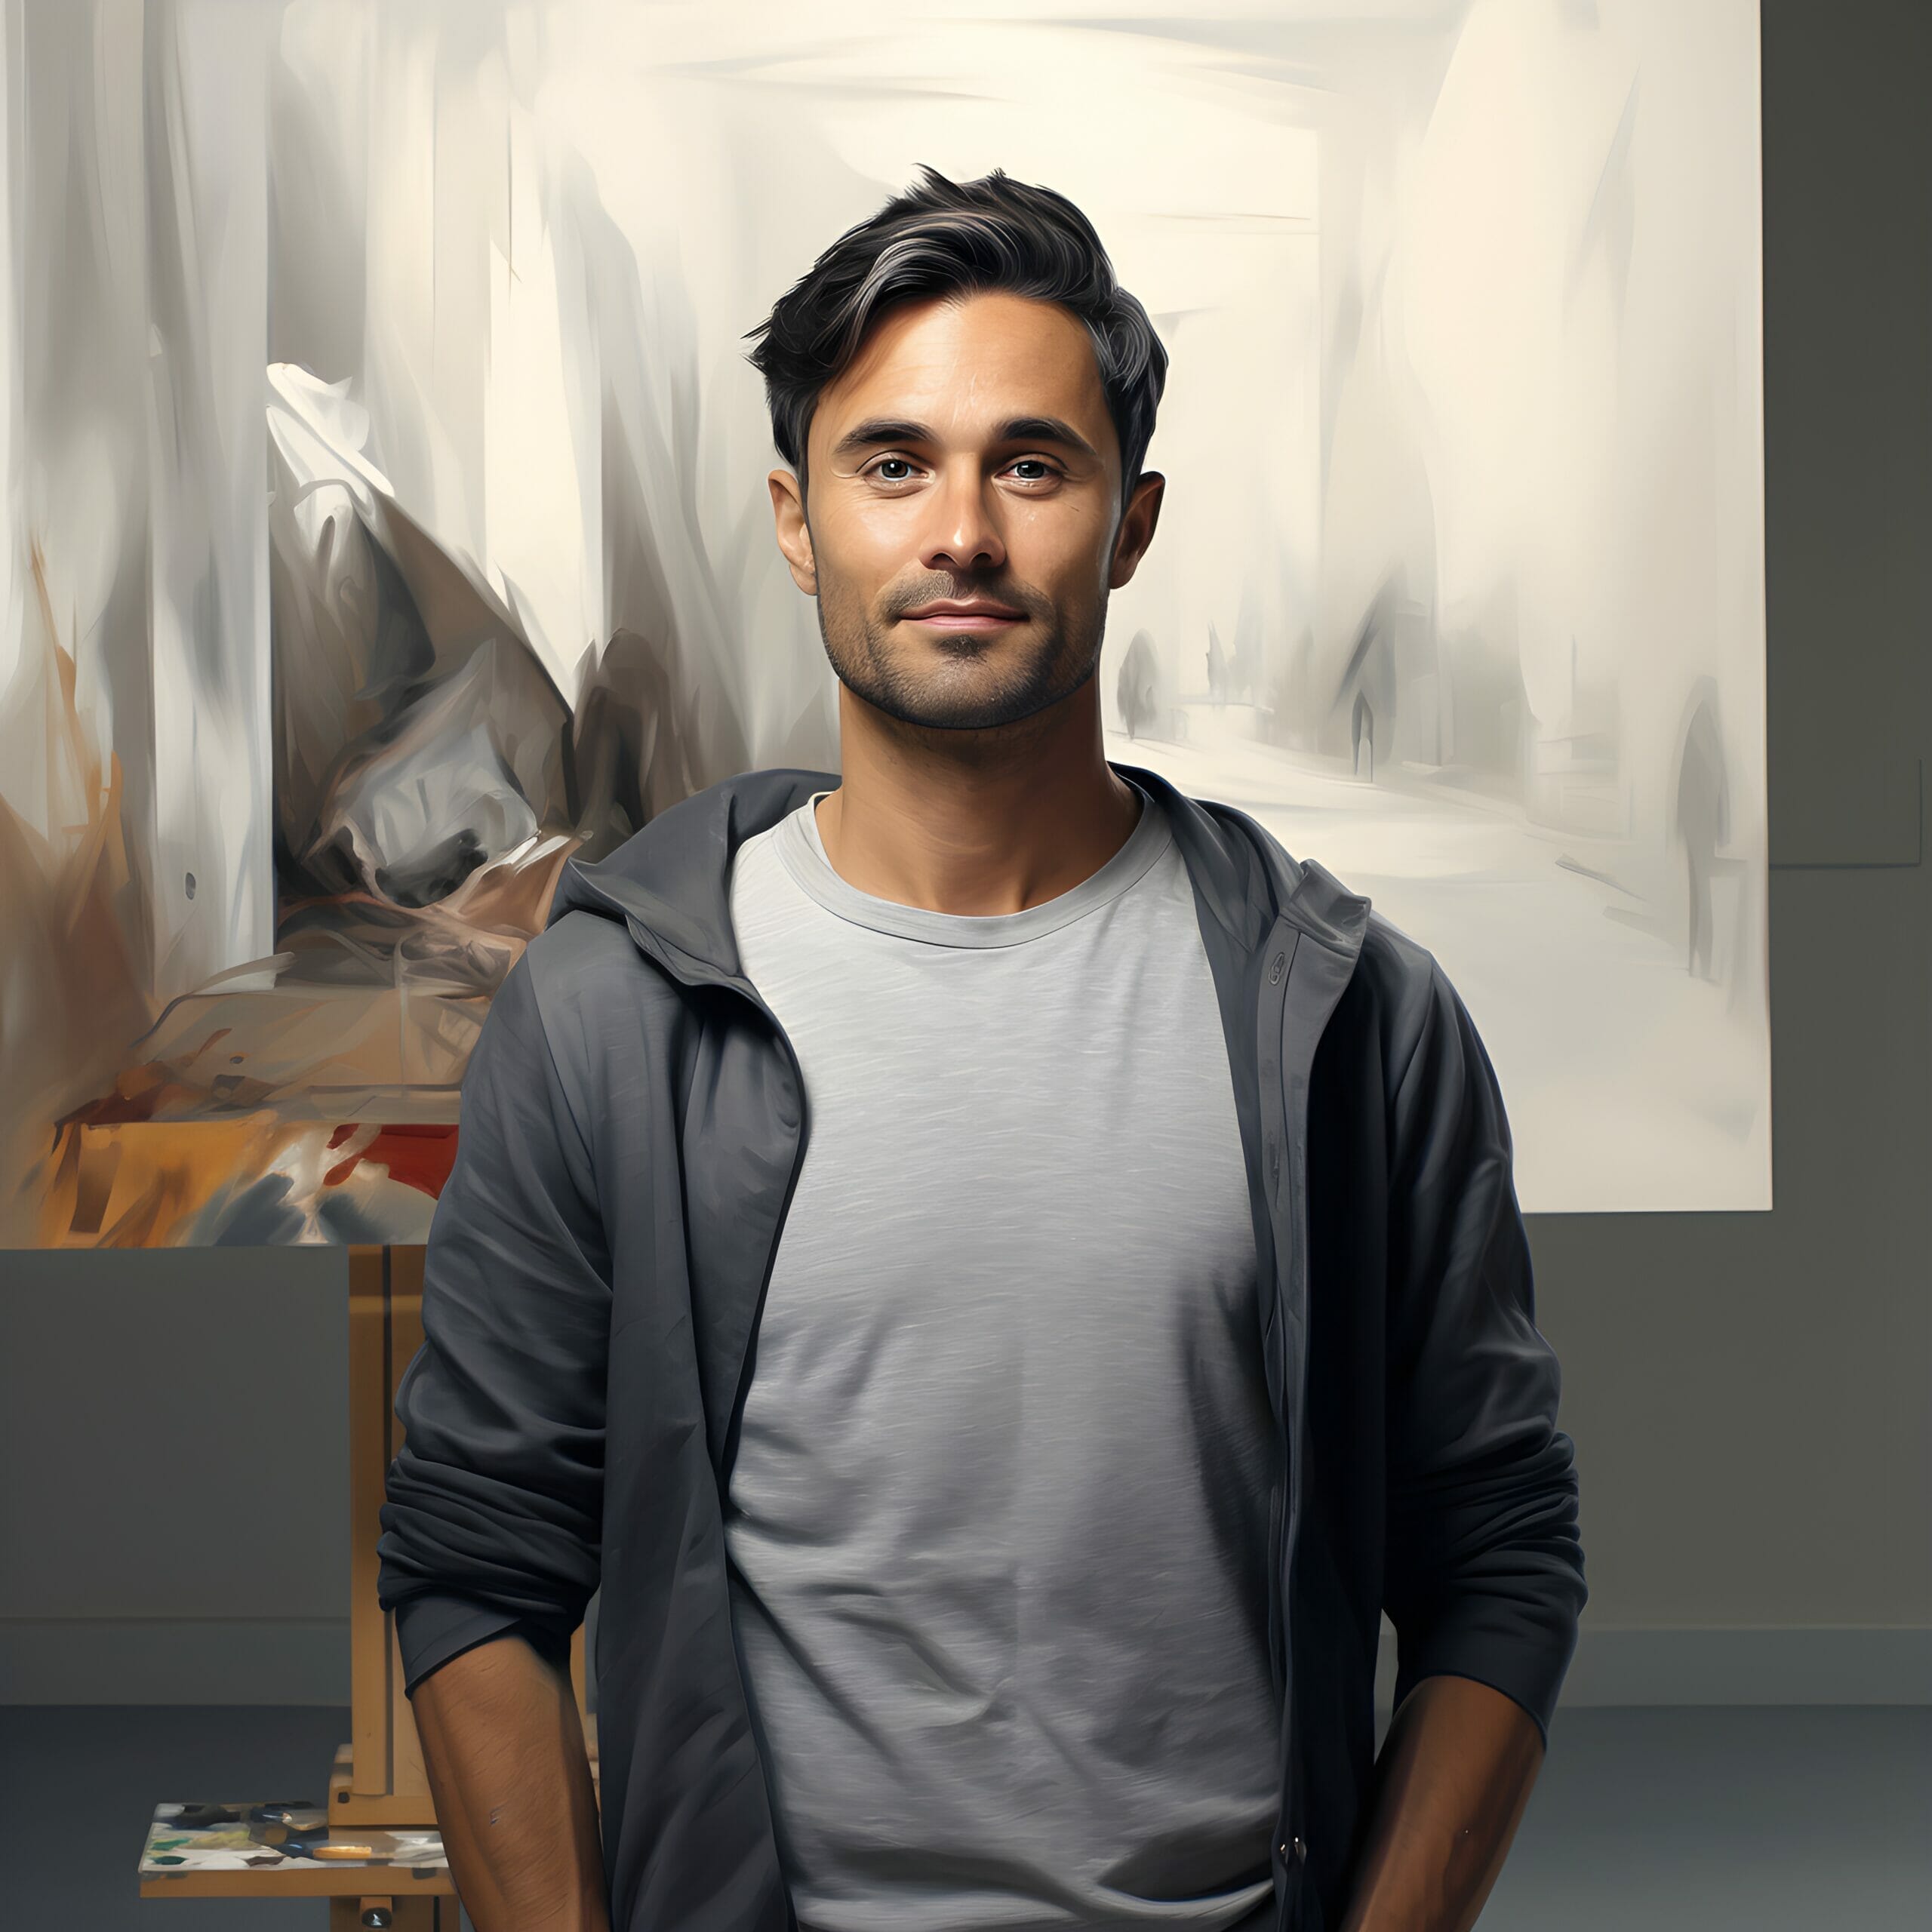 An artist standing in front of an easel.